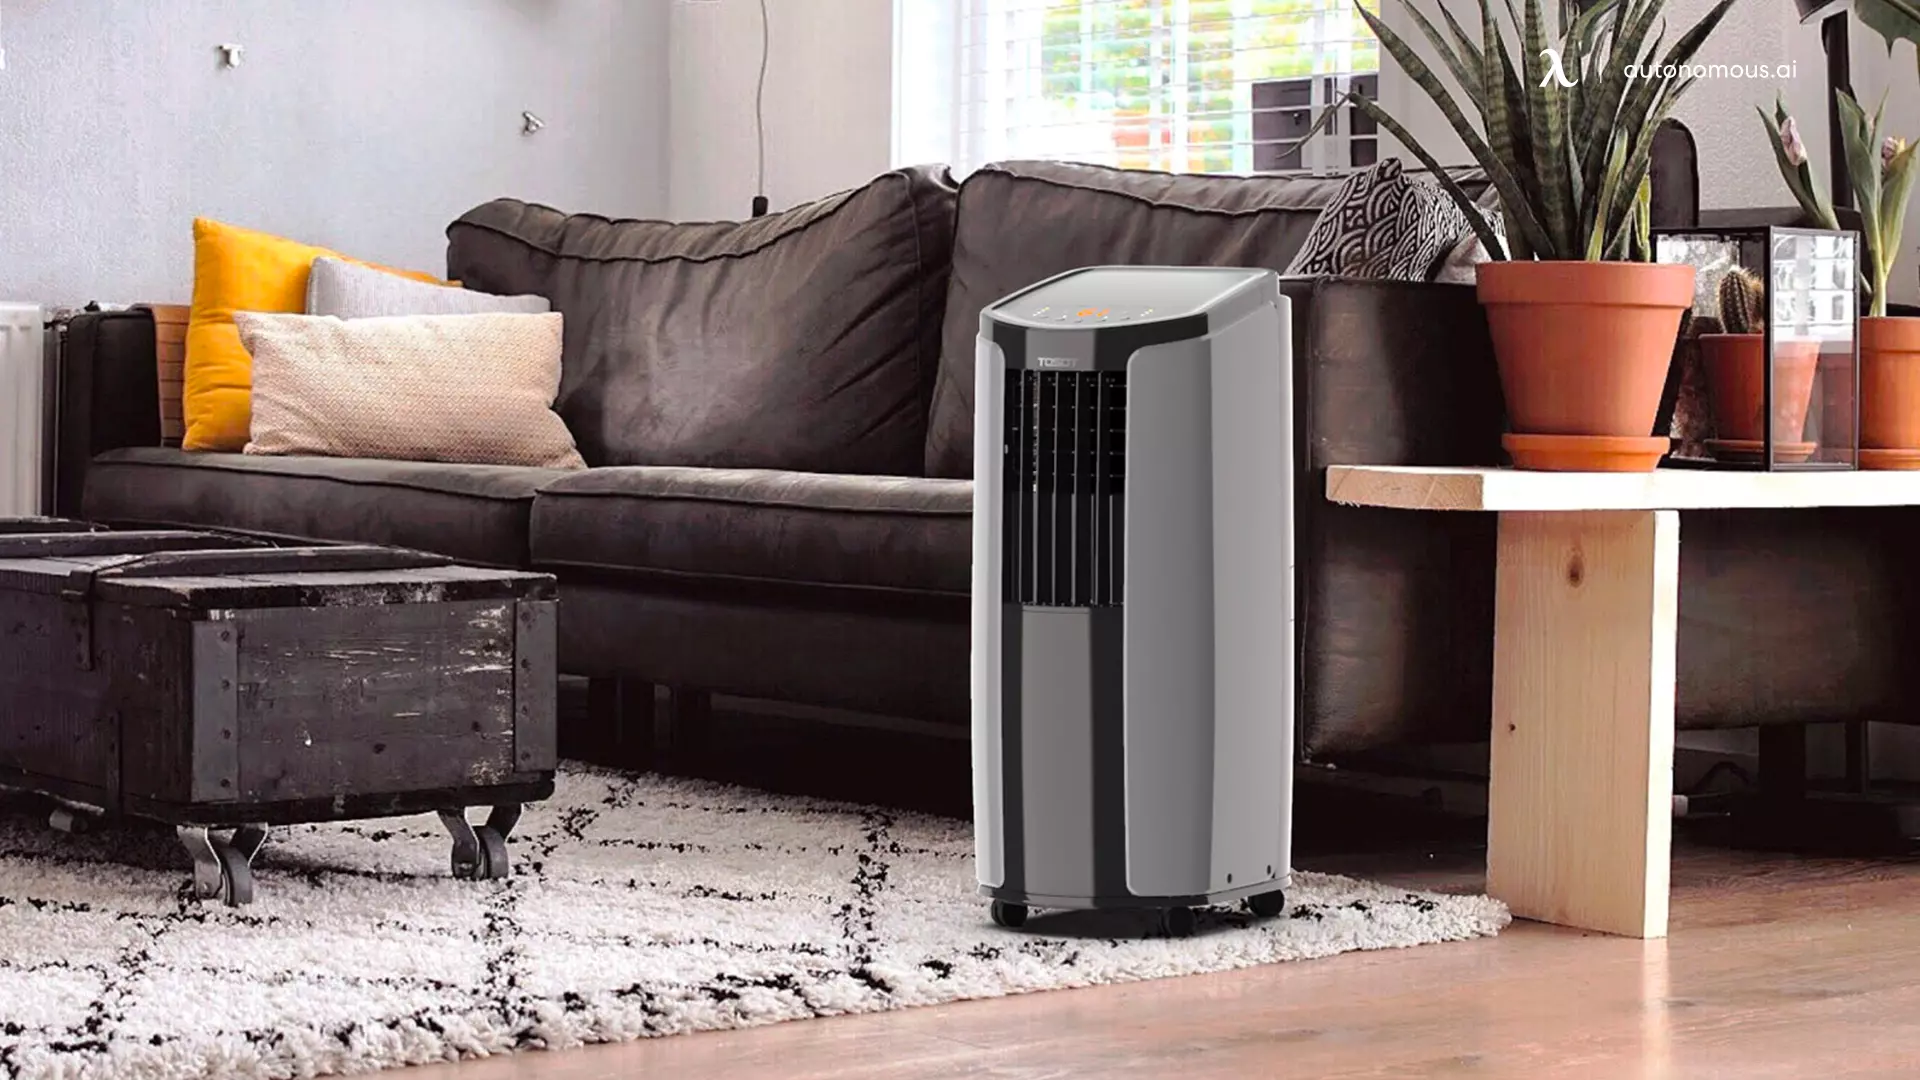 What Makes a Mini Portable Air Conditioner Different from an Air Cooler?